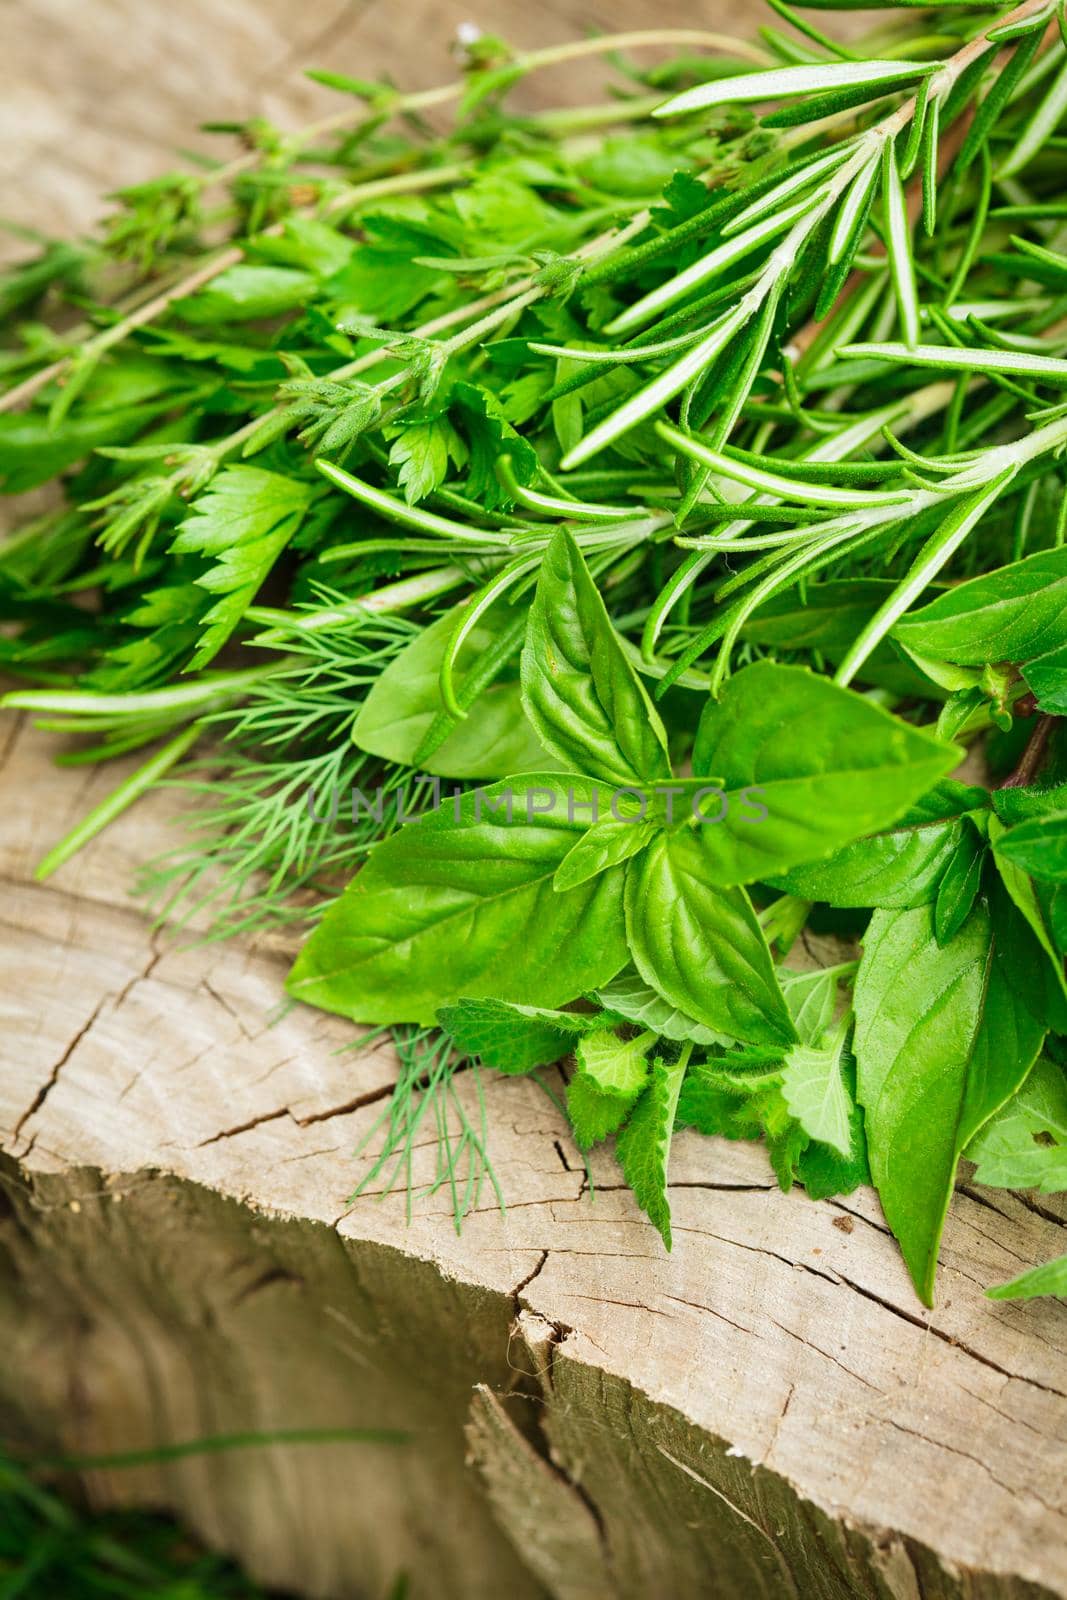 Fresh herbs outdoor on the wooden background